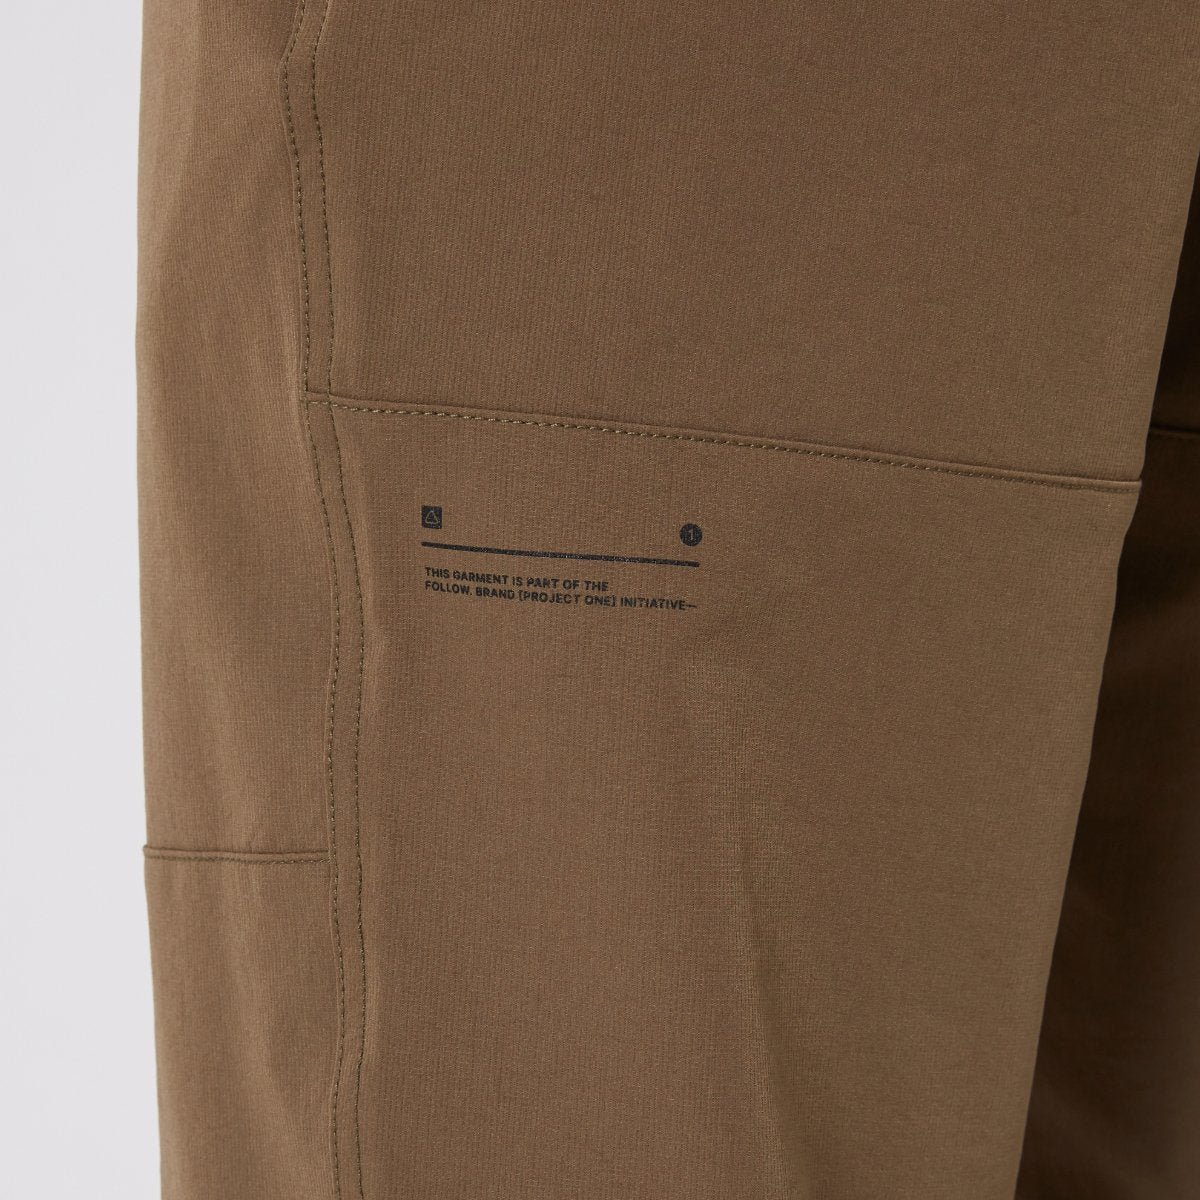 Follow All Day Pants in Deep Taupe - BoardCo